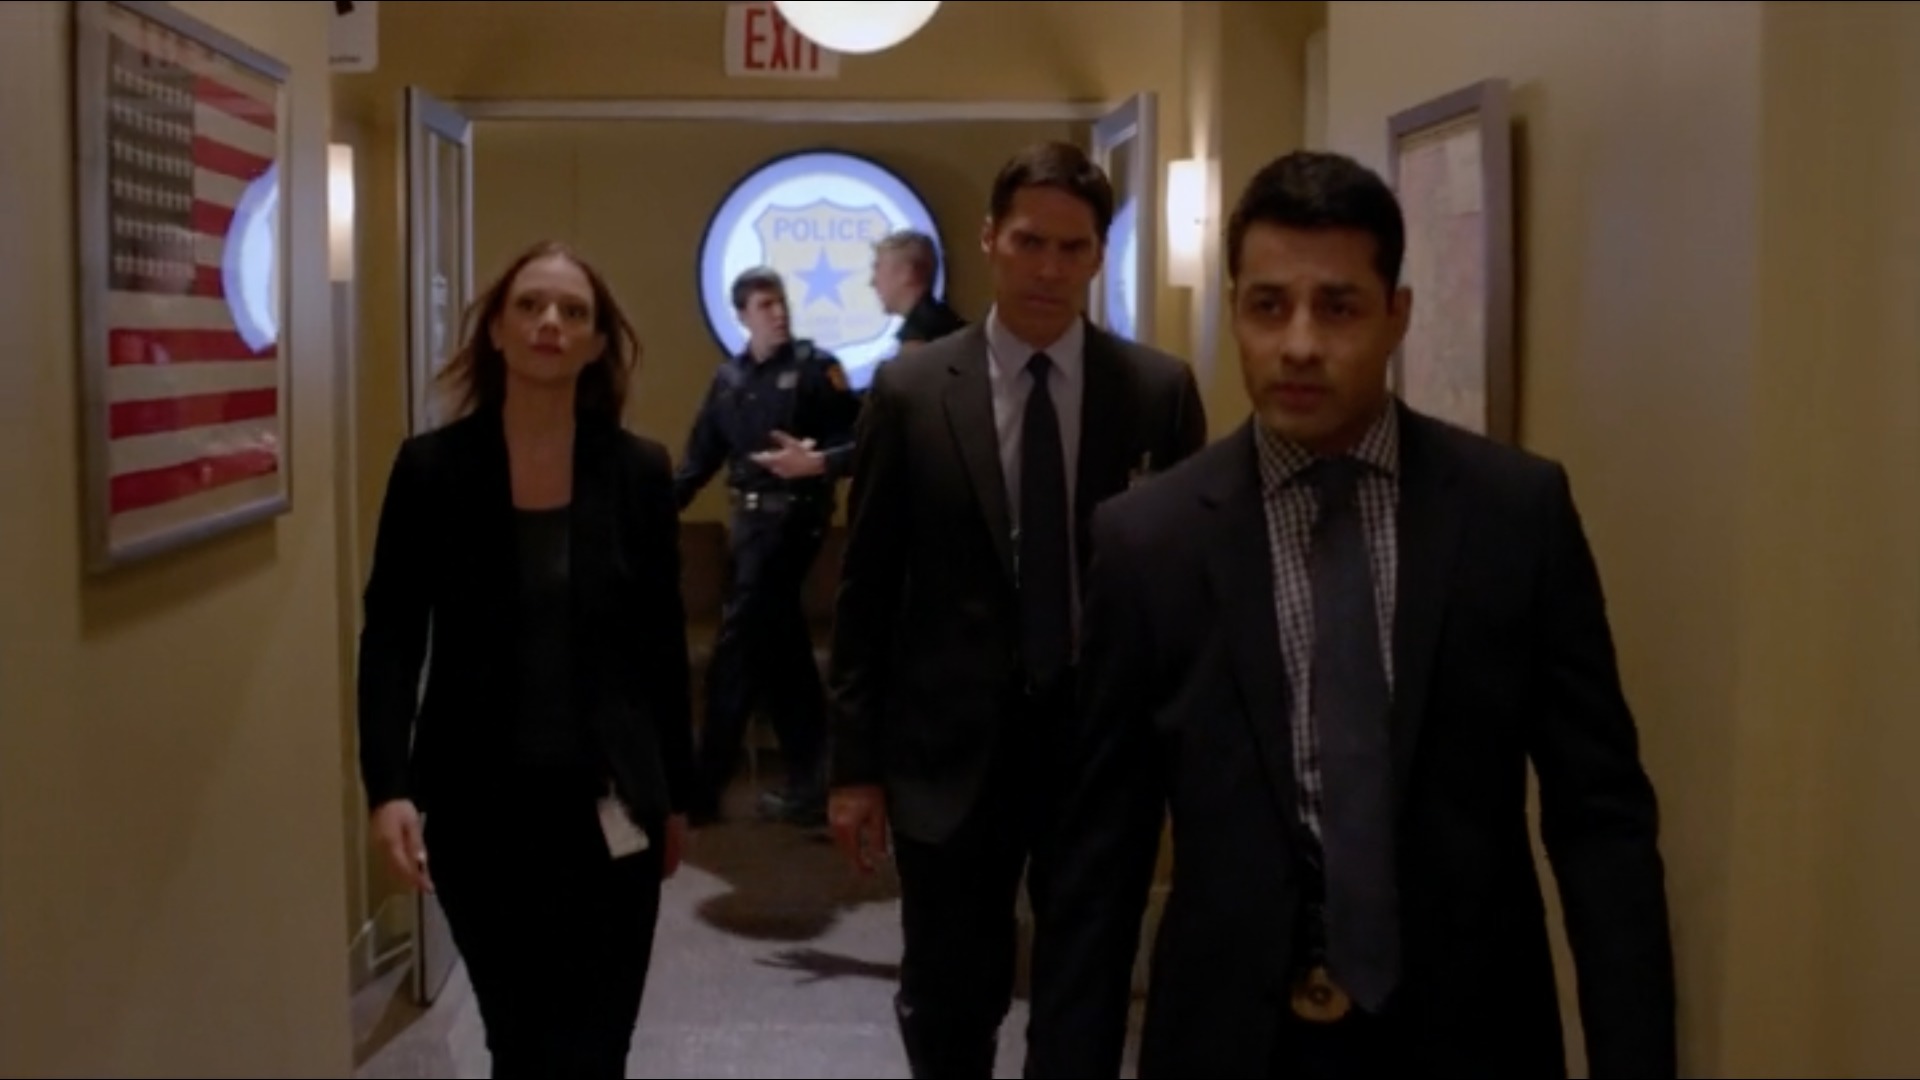 Andy Gala as Detective Ravi Shah on CBS's Criminal Minds with Thomas Gibson and A.J. Cook.